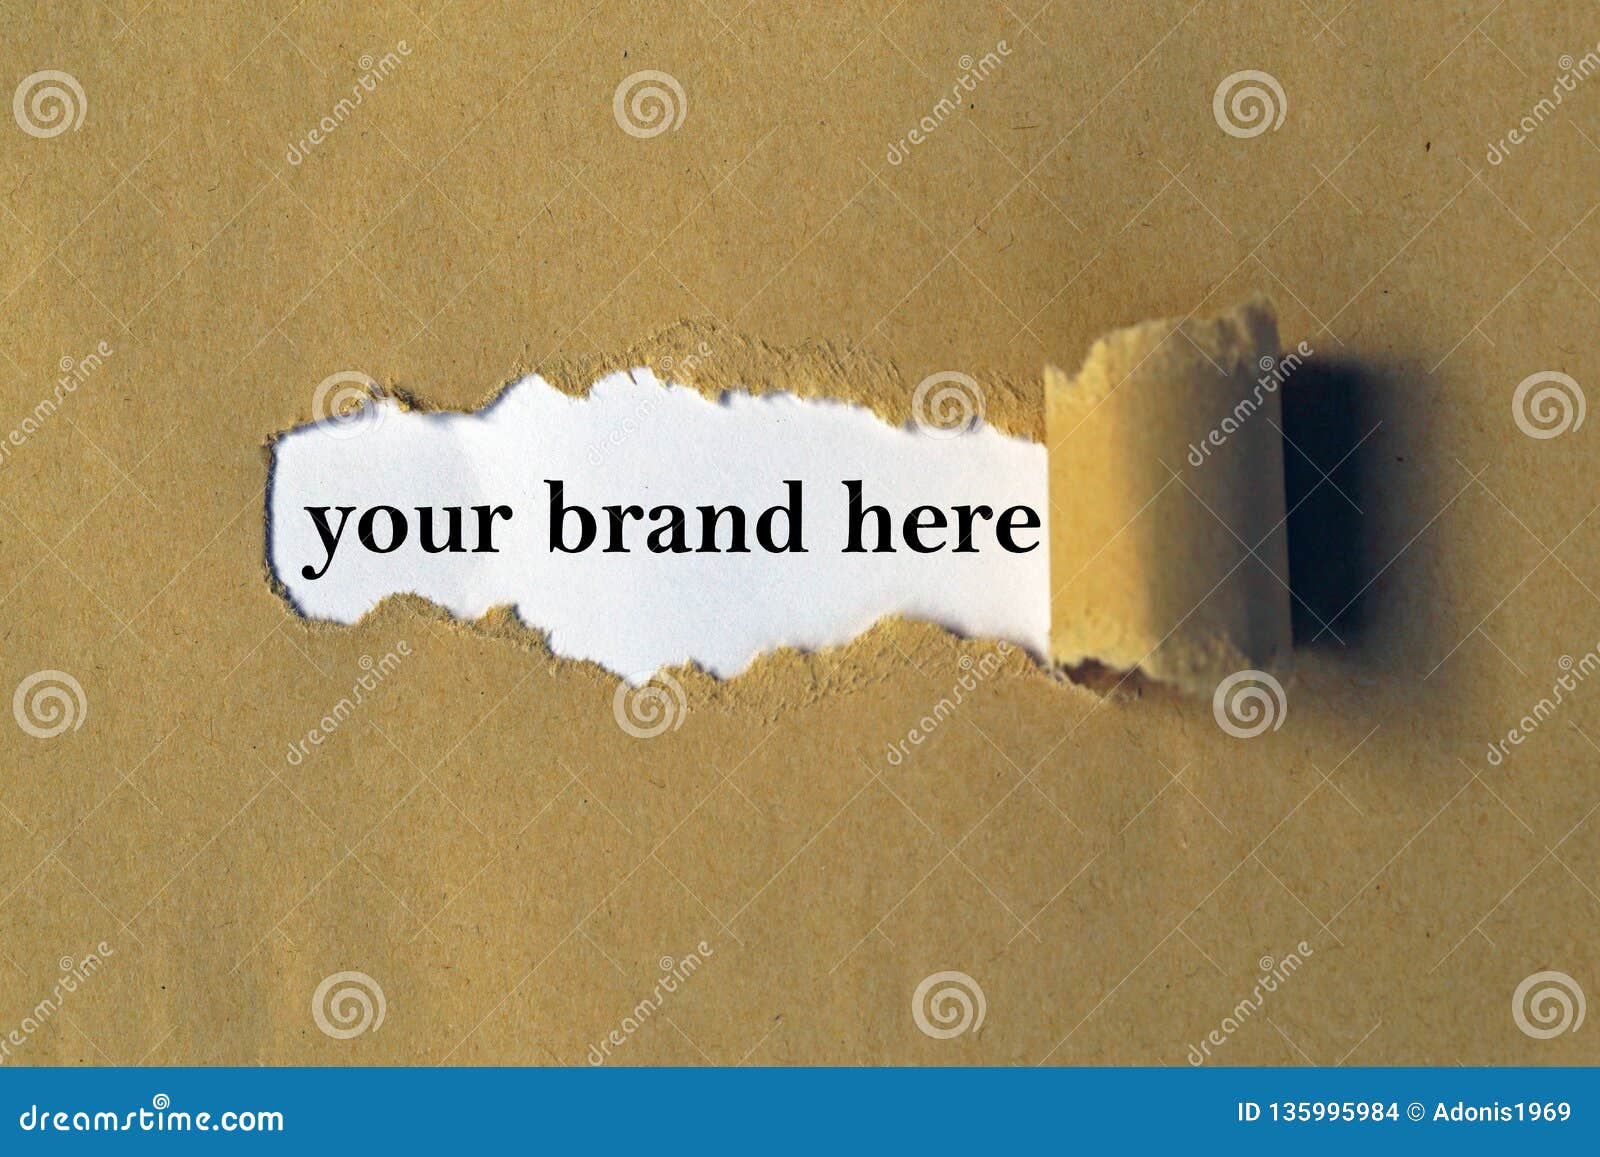 your brand here heading